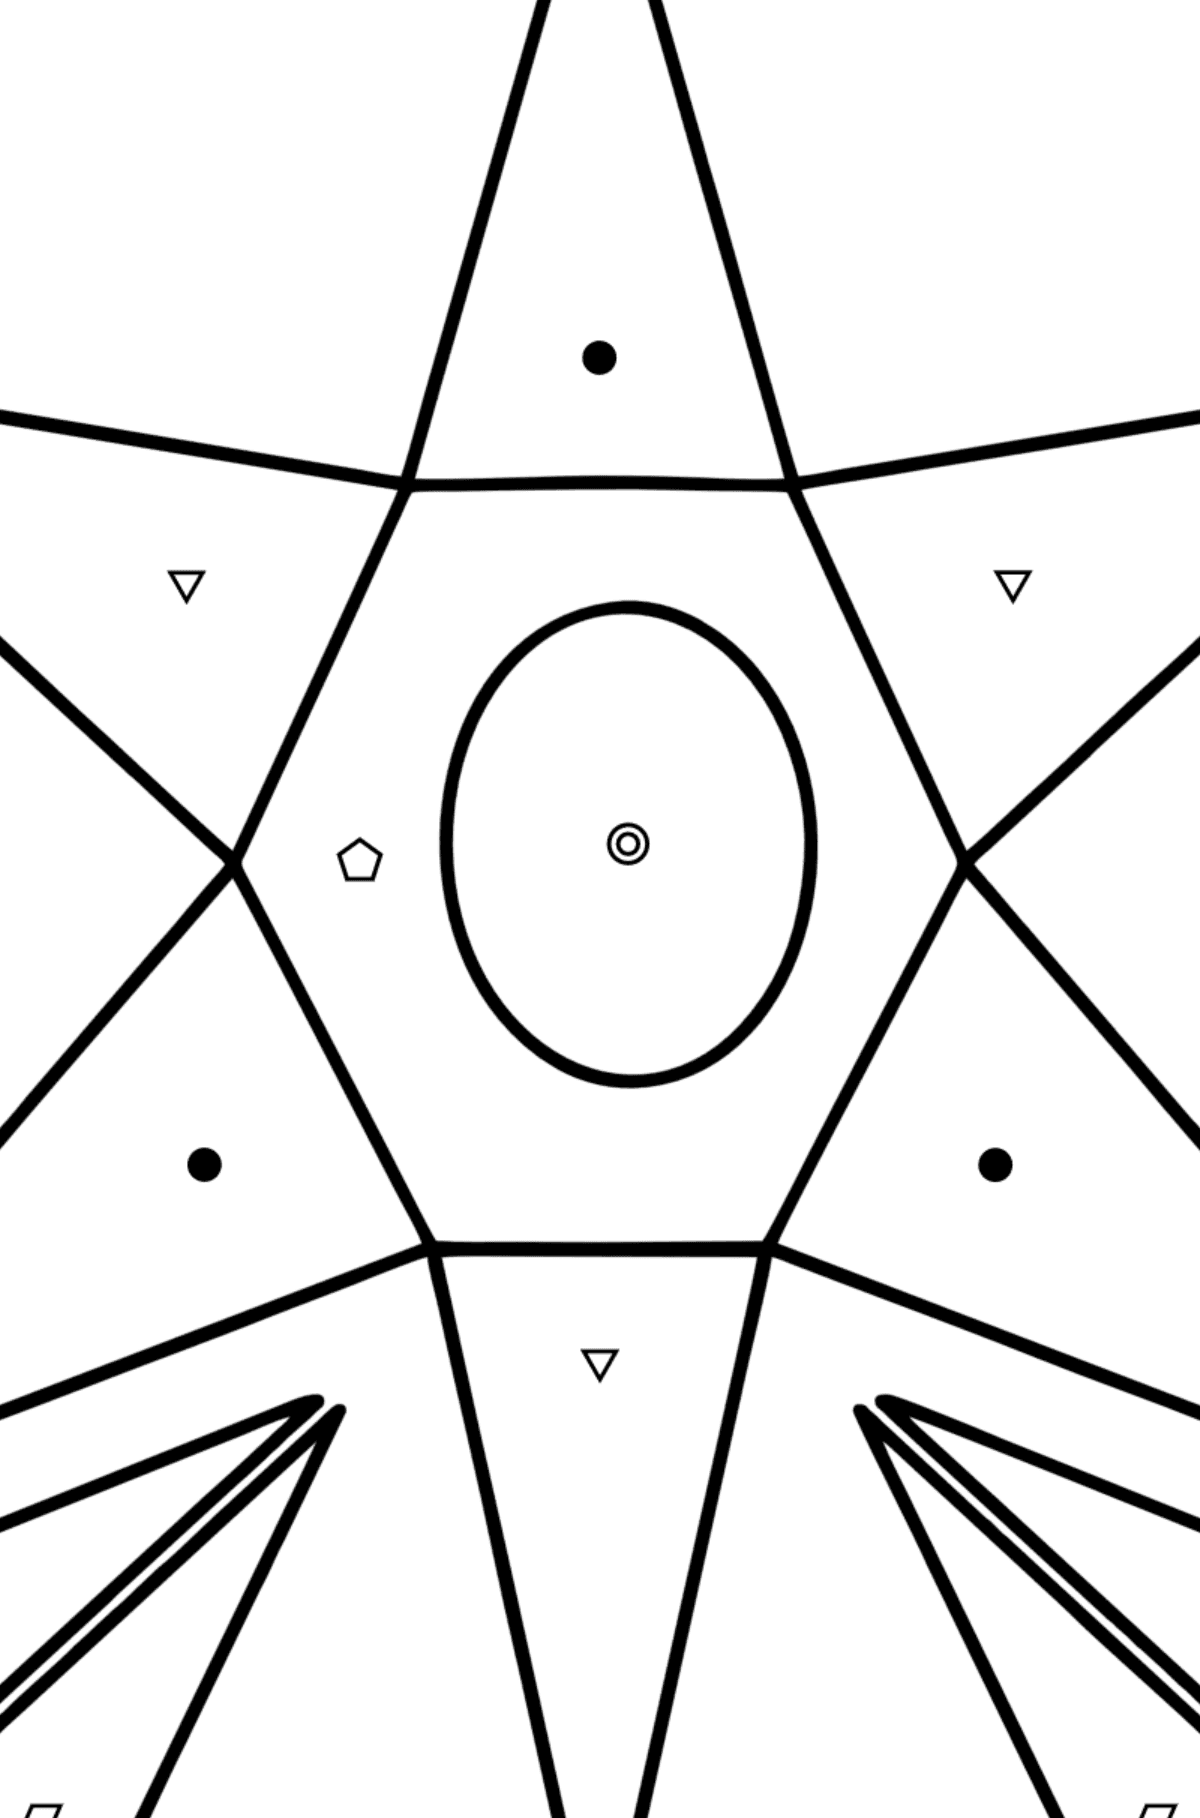 Coloring page - aster from geometric shapes - Coloring by Symbols and Geometric Shapes for Kids